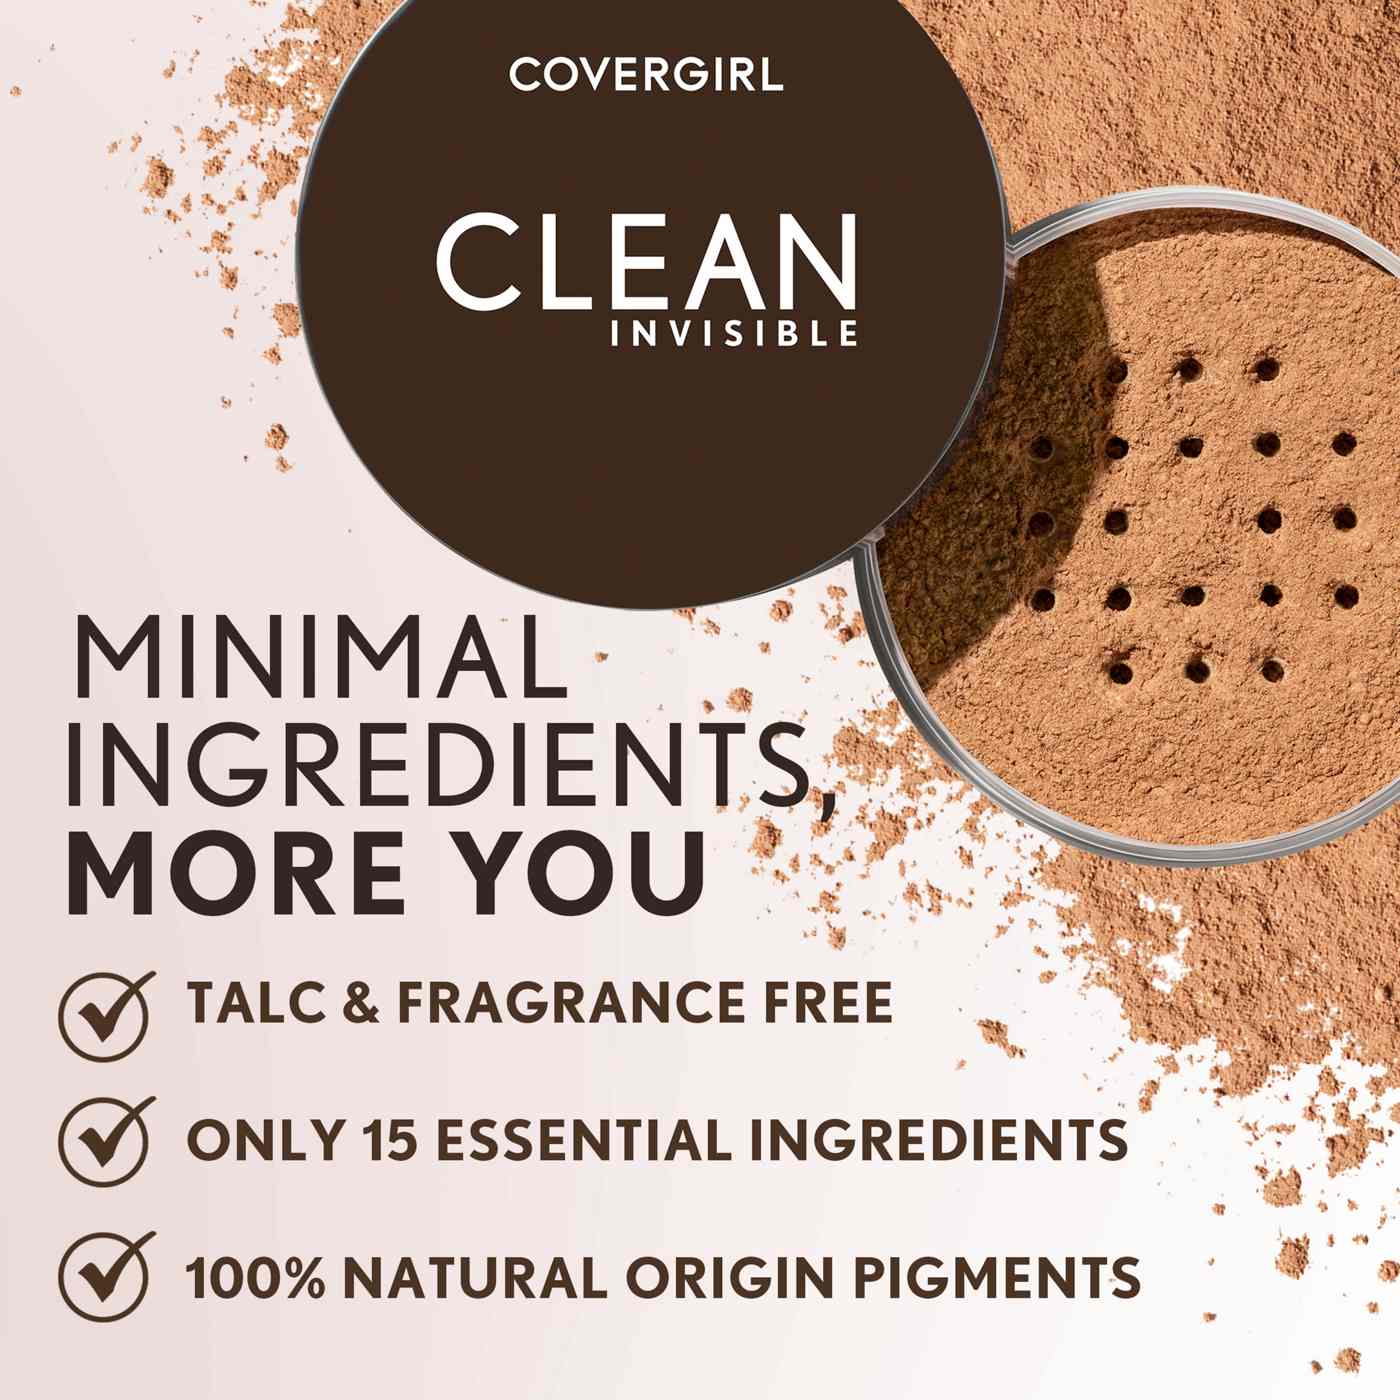 Covergirl Clean Invisible Loose Powder - Translucent Fair; image 10 of 13